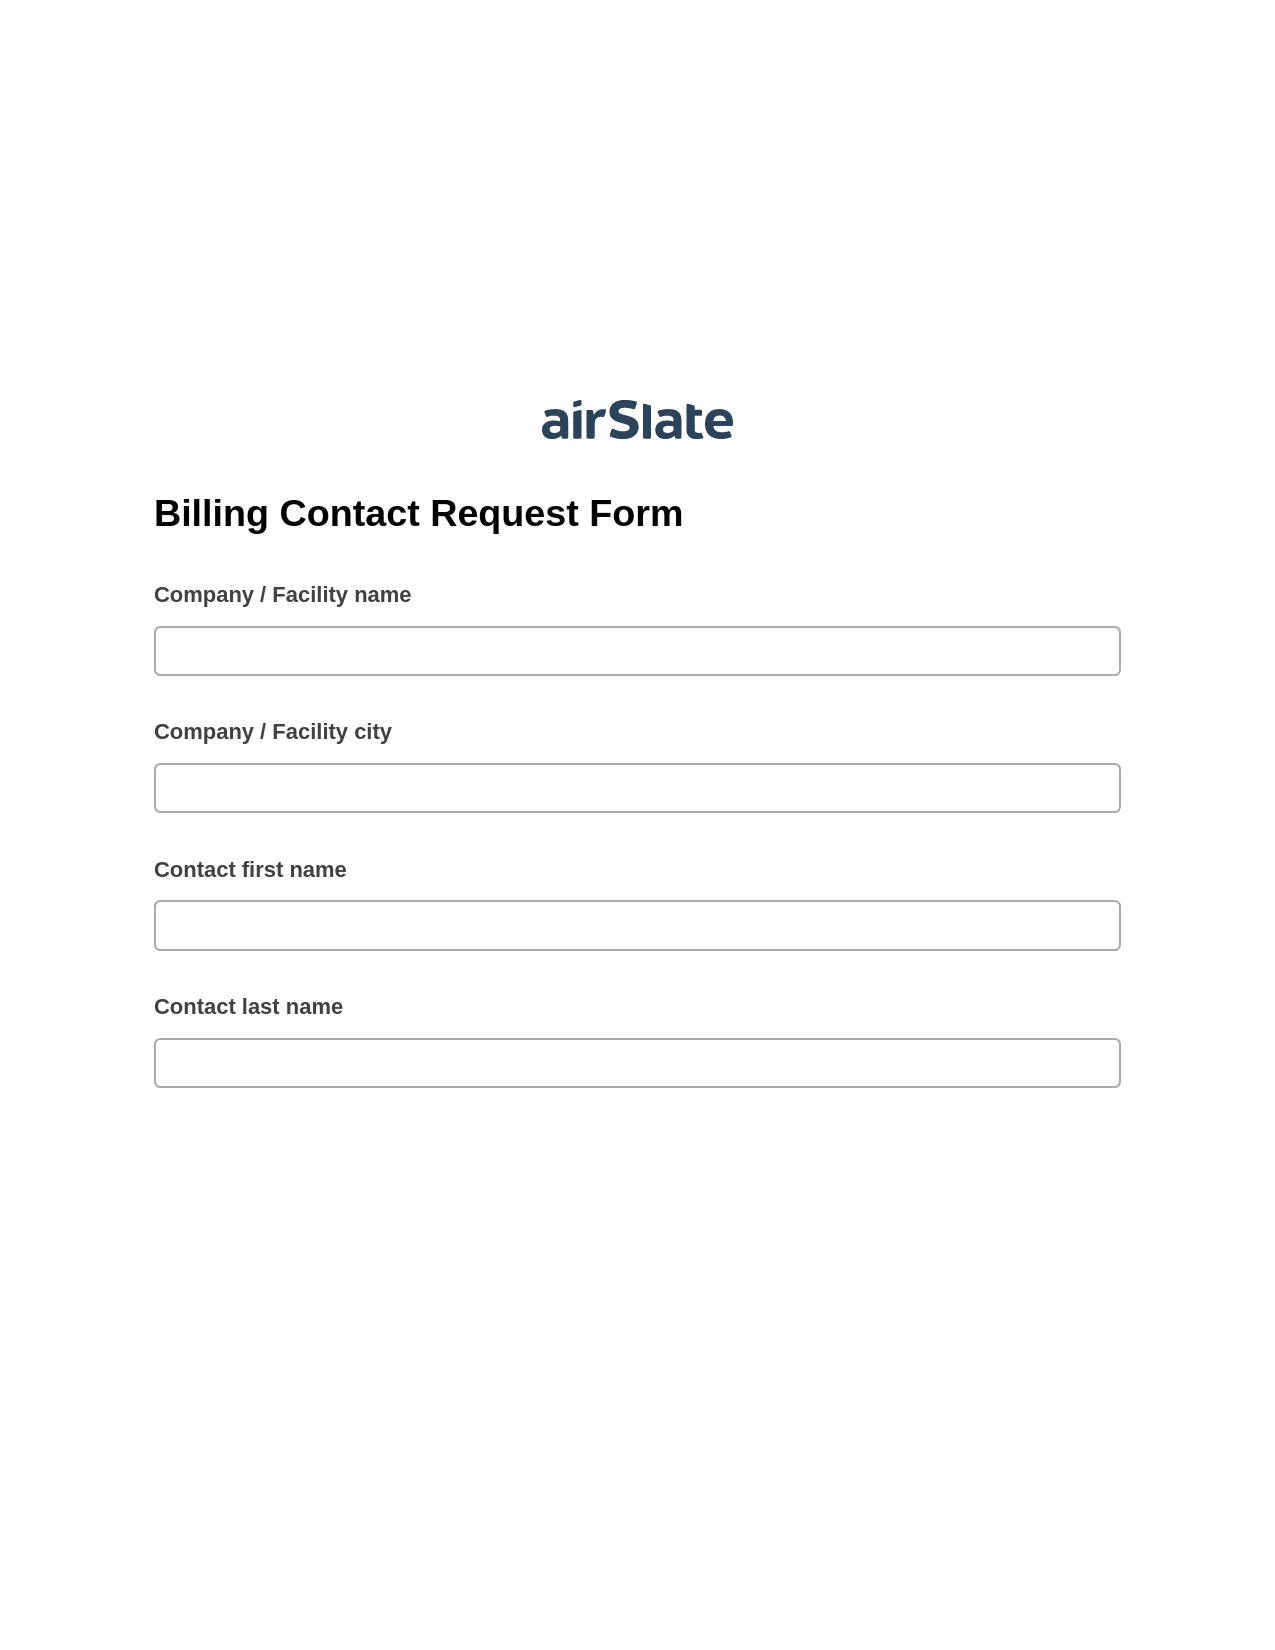 Billing Contact Request Form Pre-fill Document Bot, Update NetSuite Records Bot, Export to Salesforce Bot